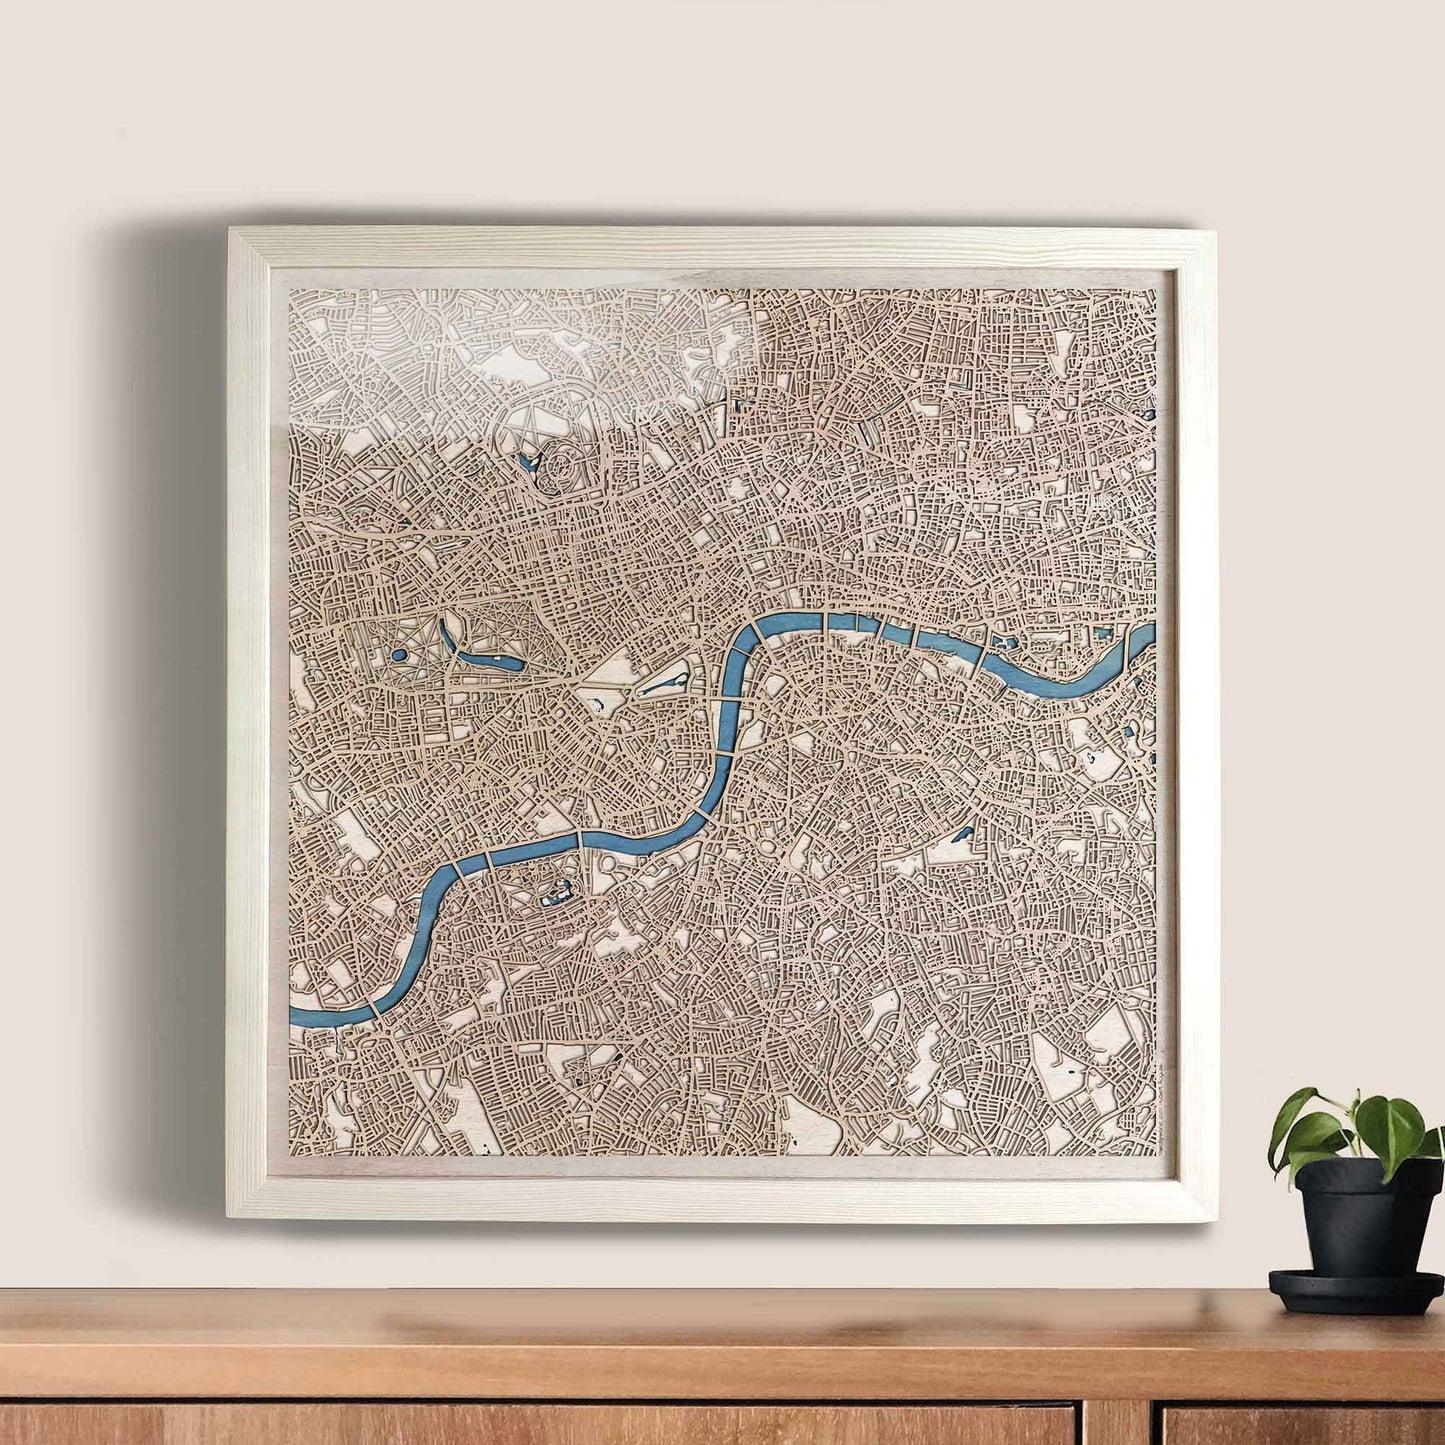 London Wooden Map by CityWood - Custom Wood Map Art - Unique Laser Cut Engraved - Anniversary Gift